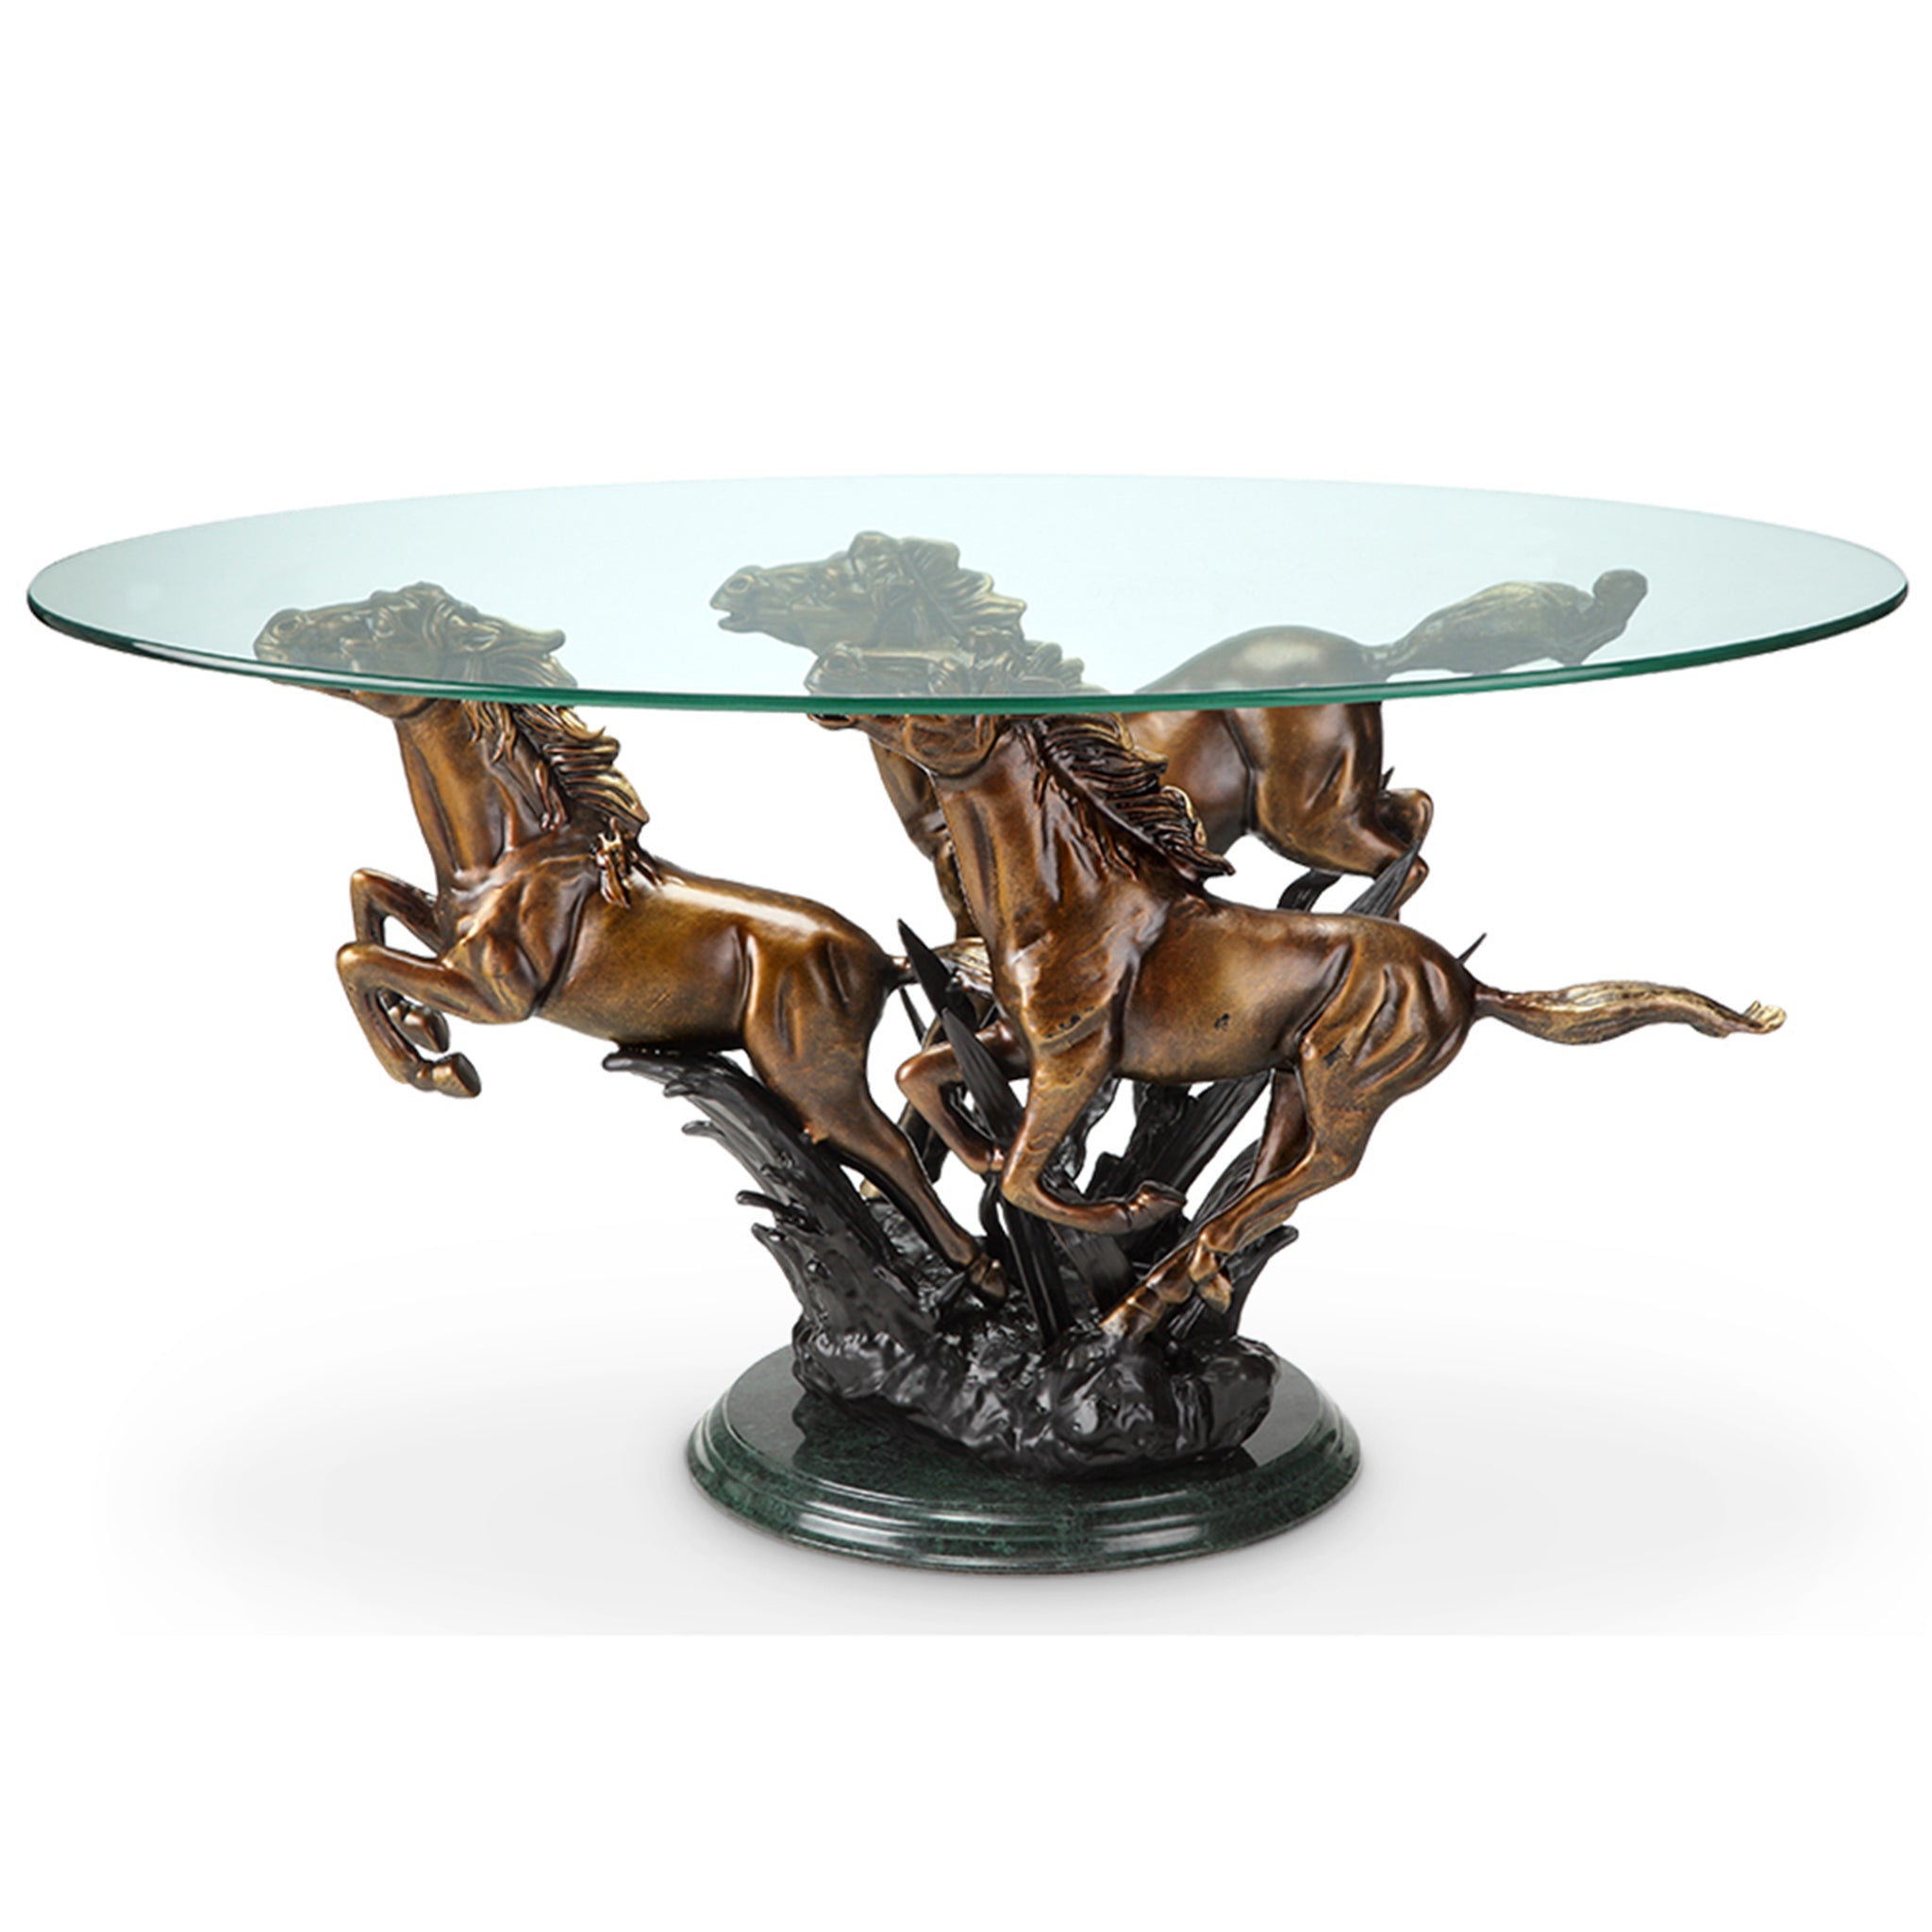 Galloping Horse Trio Coffee Table